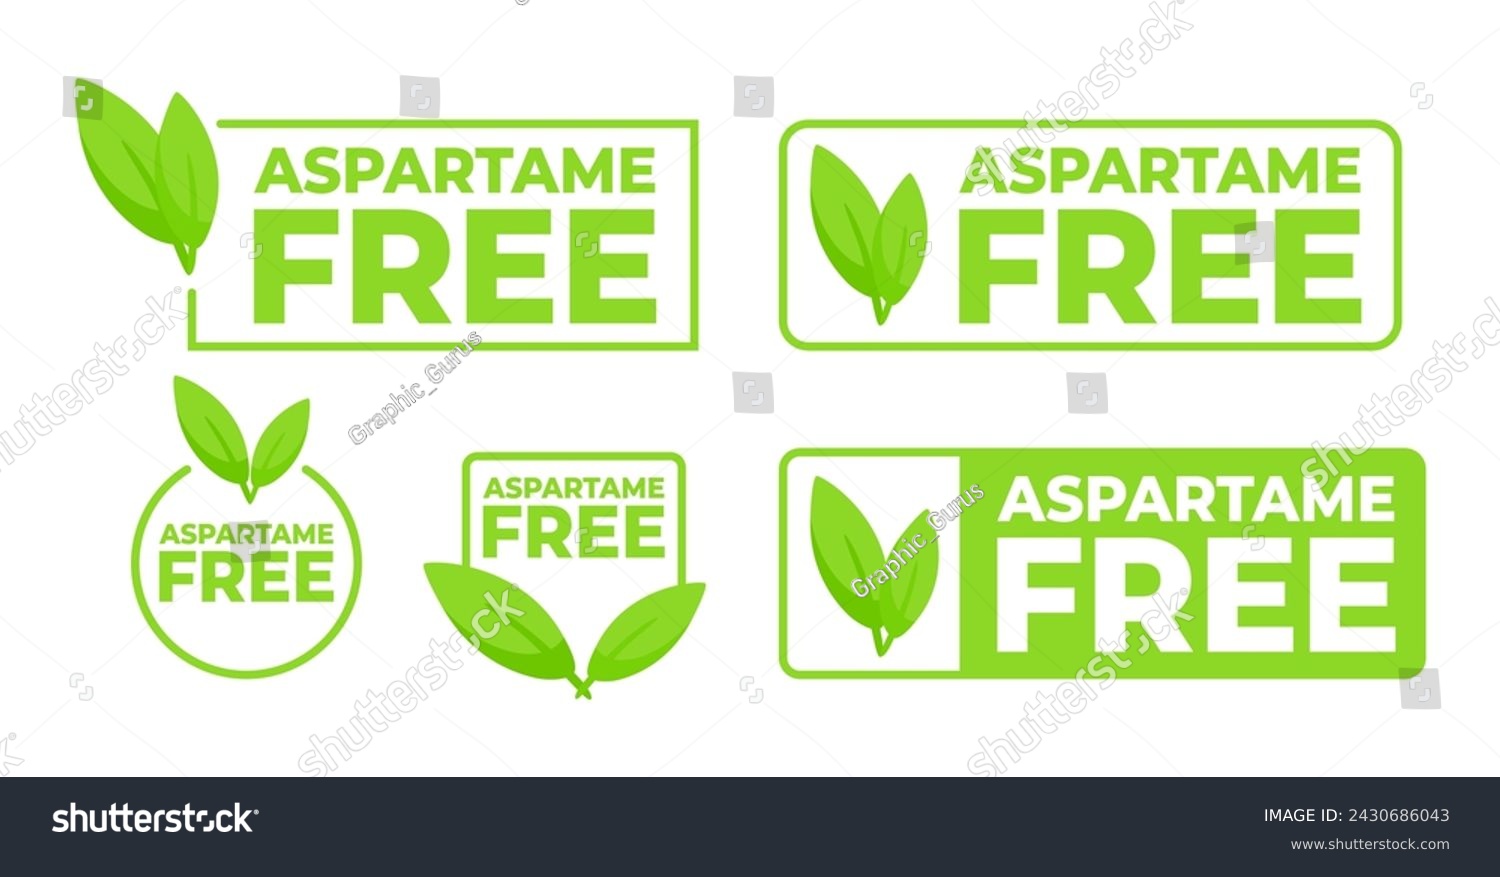 SVG of Green labels Aspartame Free with a simple leaf design, signifying health-conscious choices in food and beverages. svg